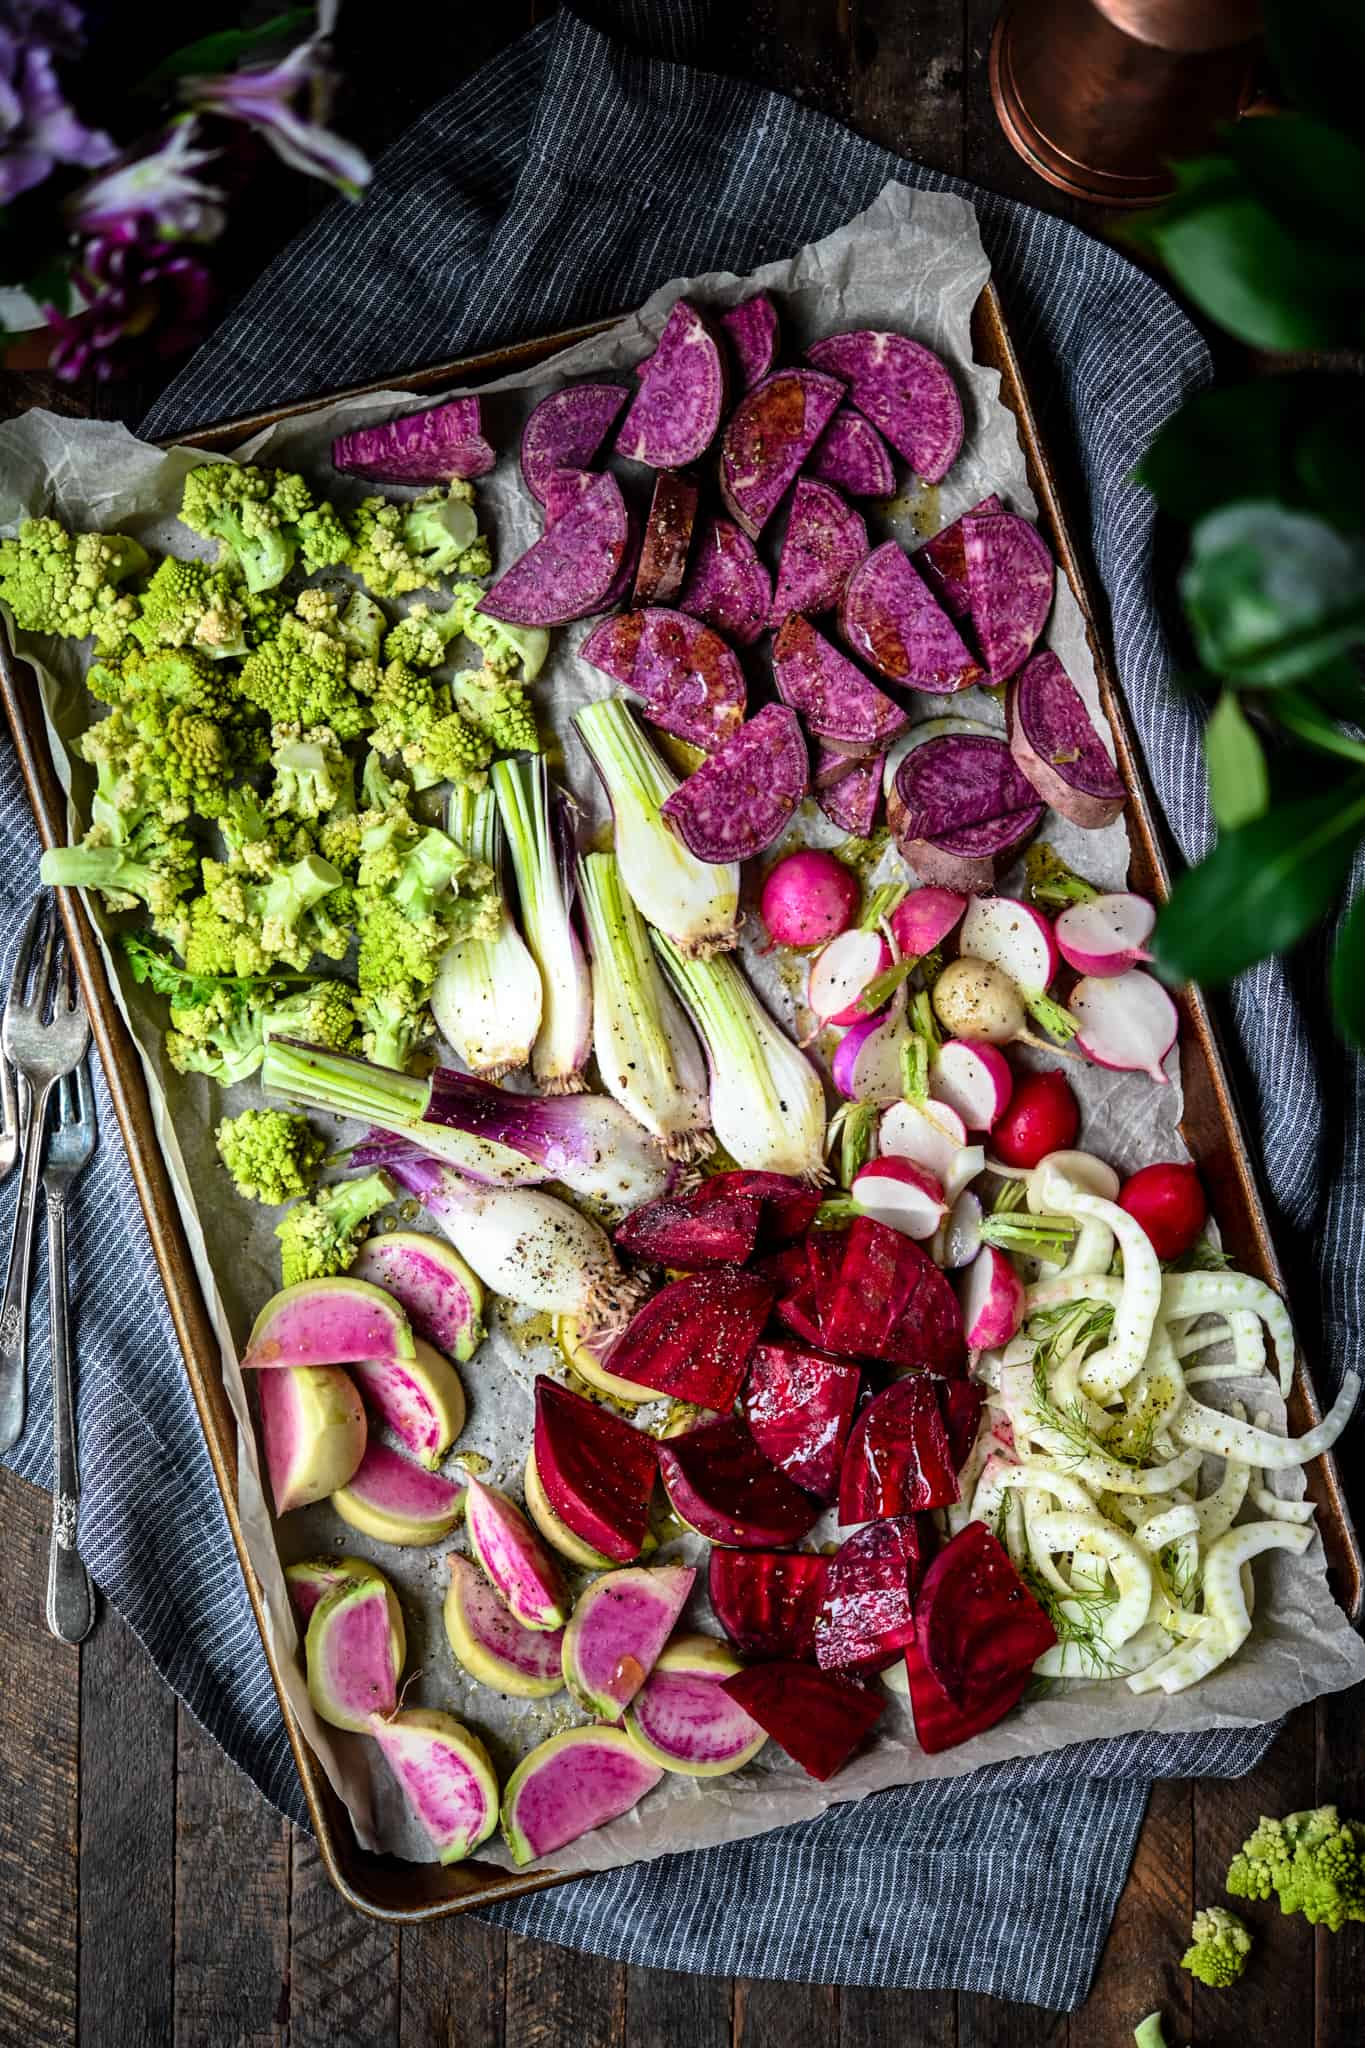 Overhead of sheet pan with uncooked purple, pink and green vegetables